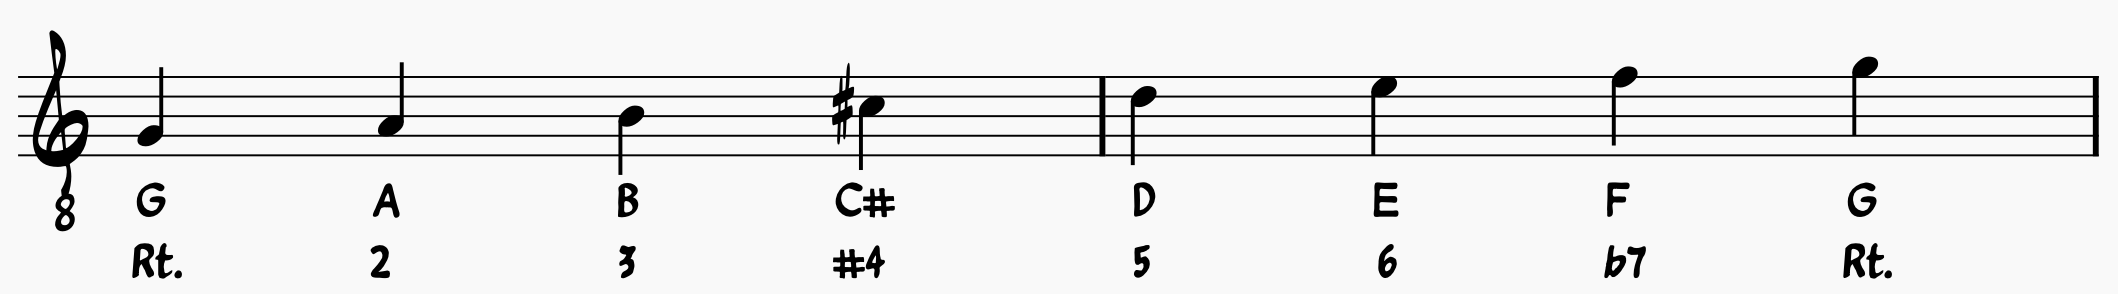 Blues Scale Guide: G Lydian Dominant Scale